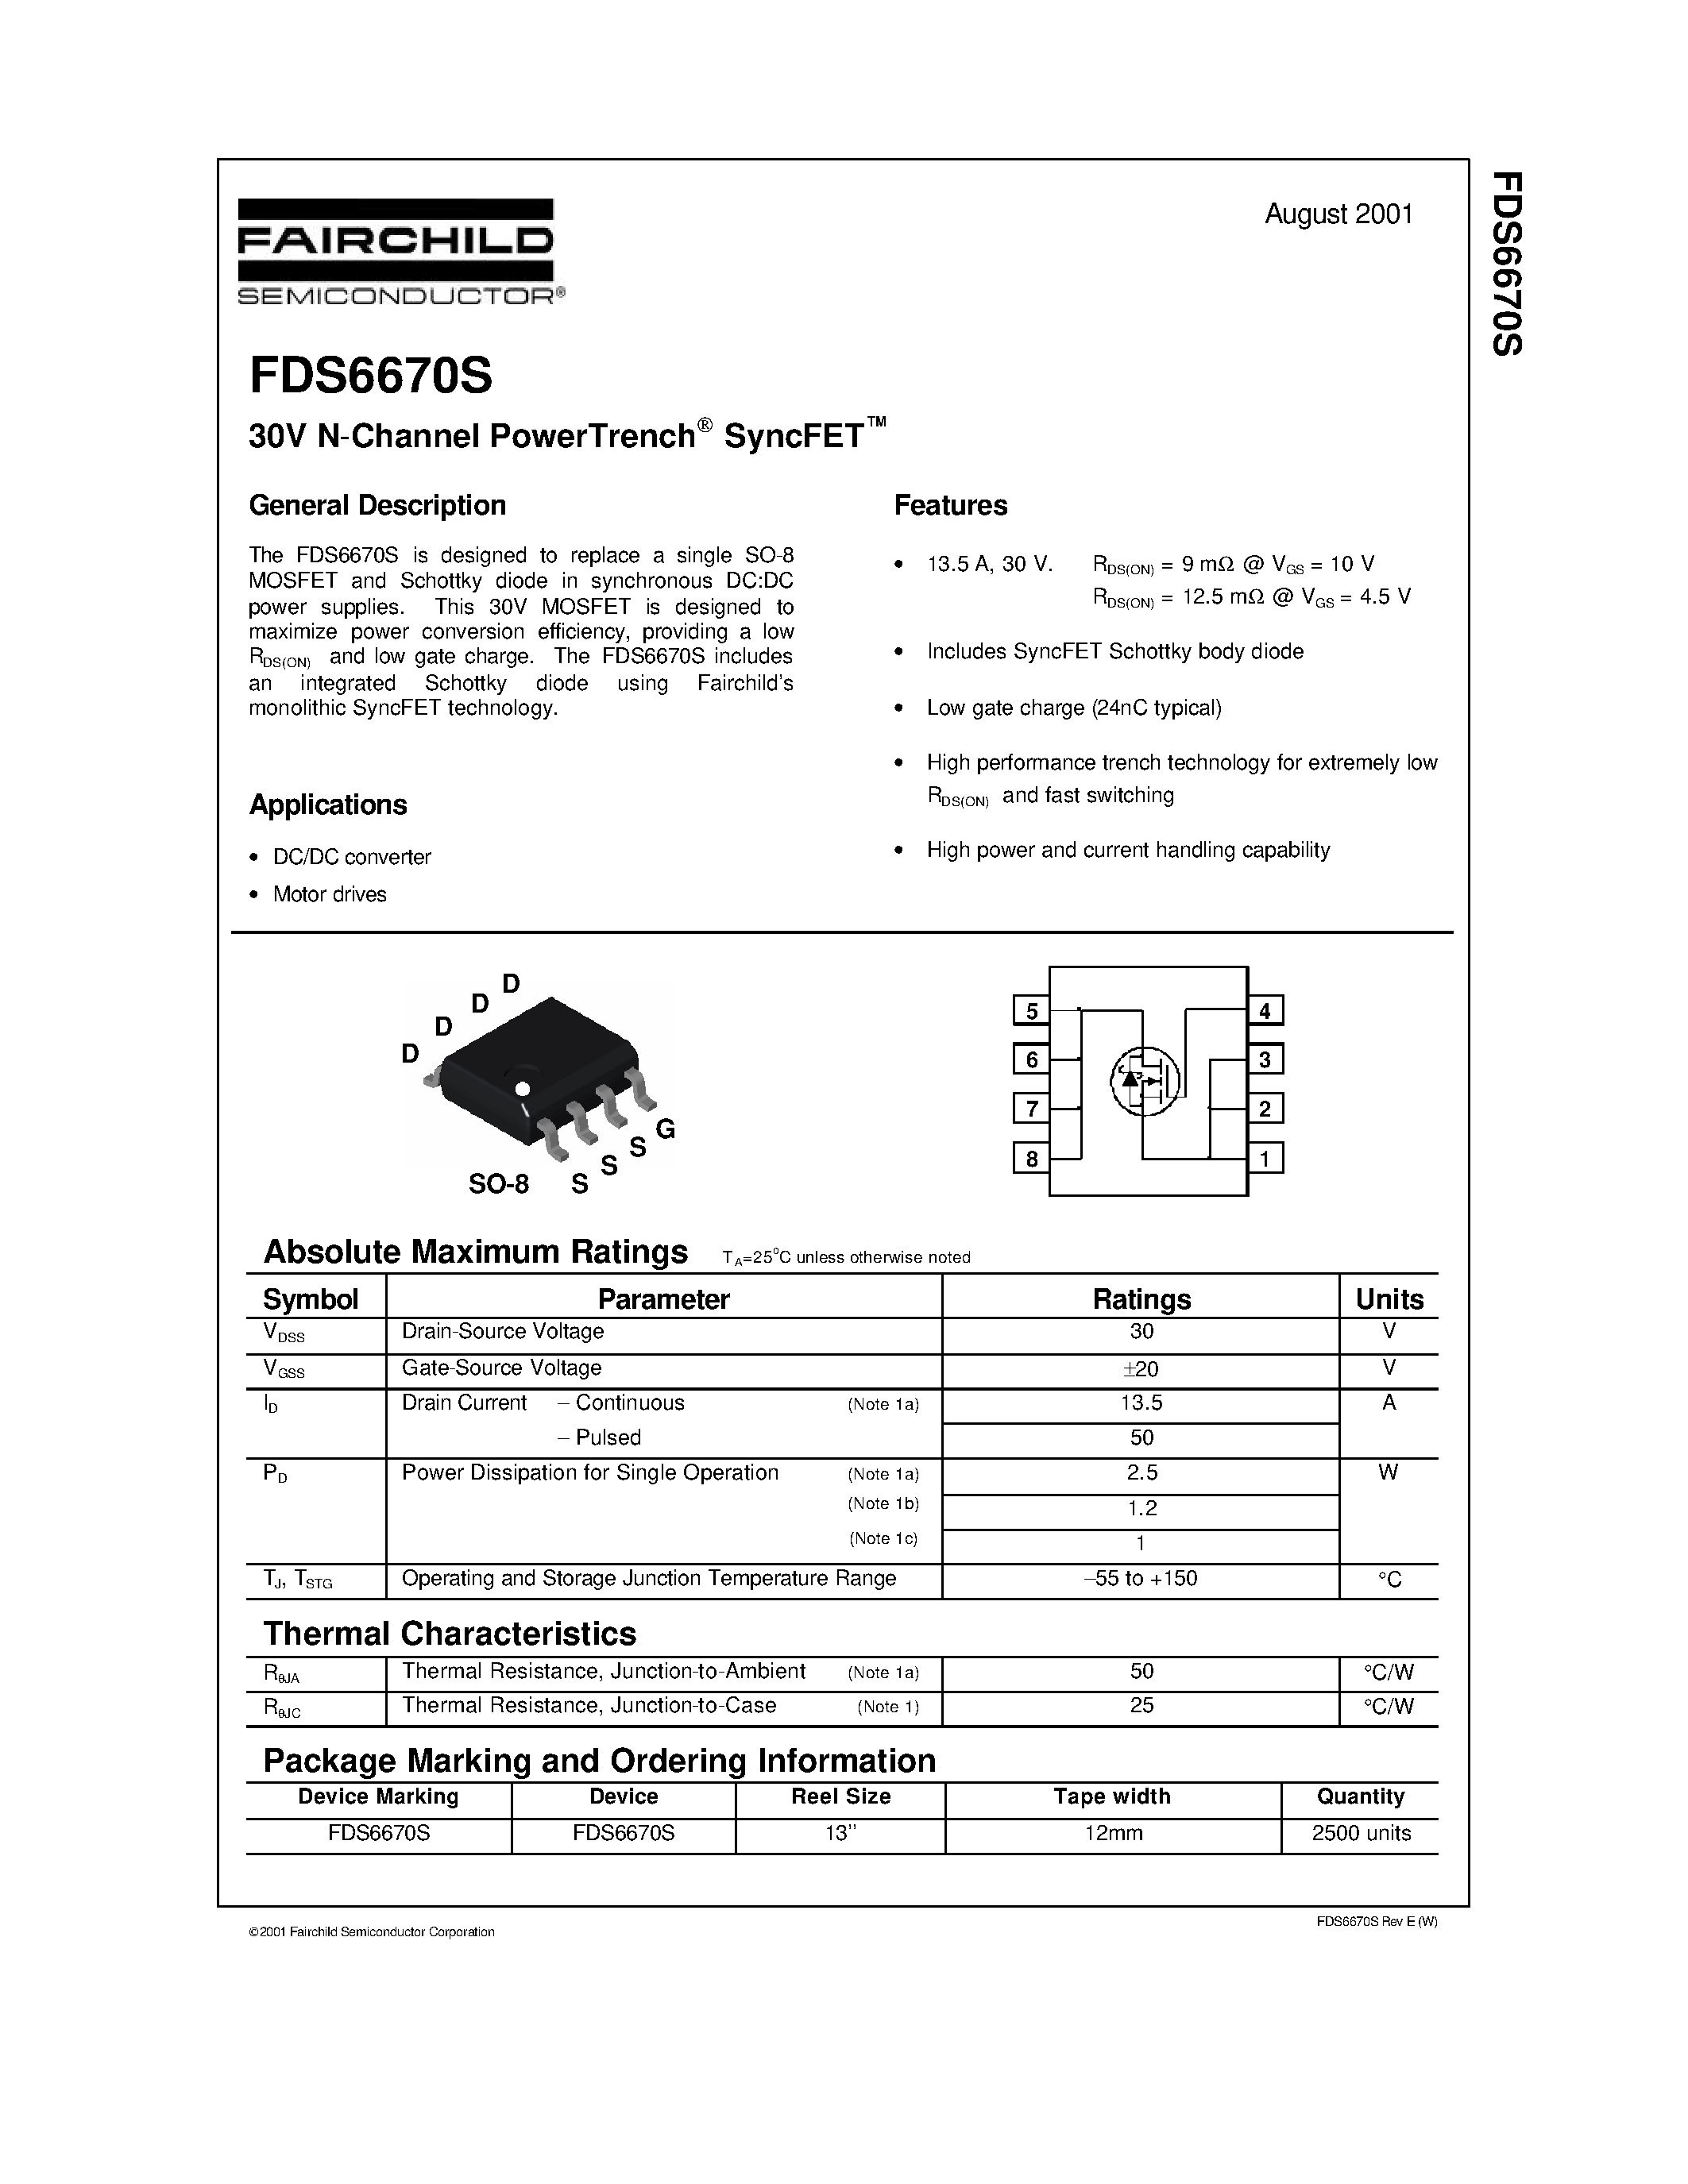 Даташит FDS6670S - 30V N-Channel PowerTrench SyncFET страница 1